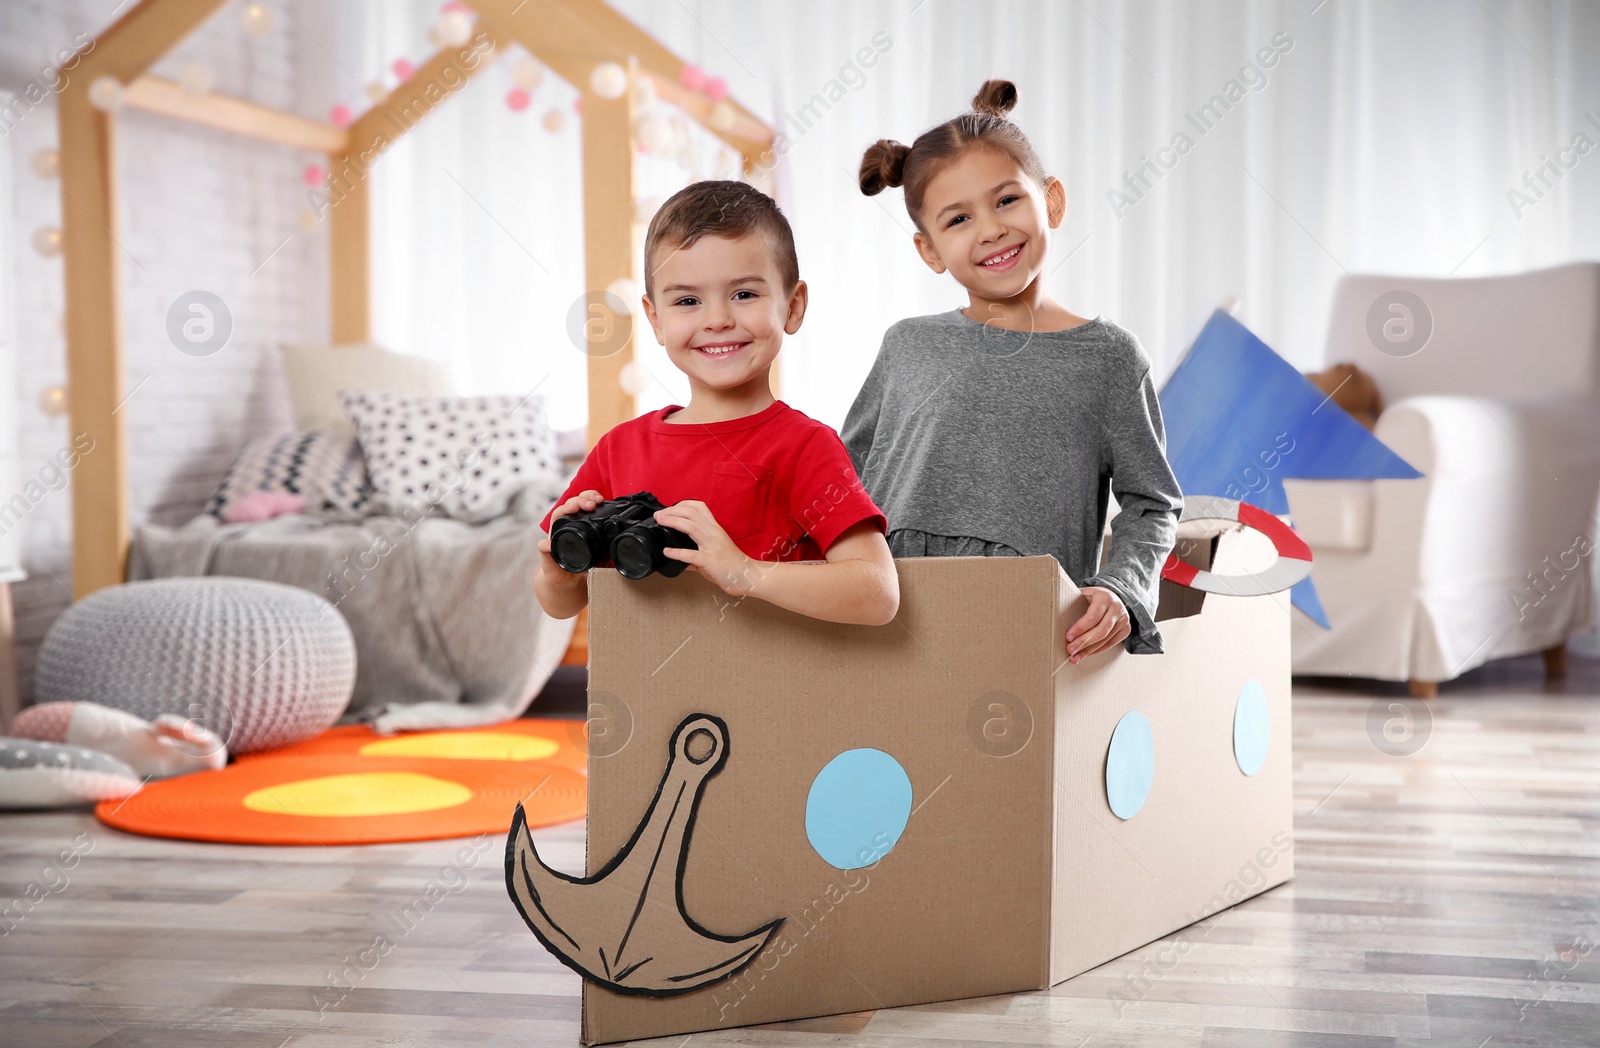 Photo of Cute little kids playing with binoculars and cardboard boat in bedroom